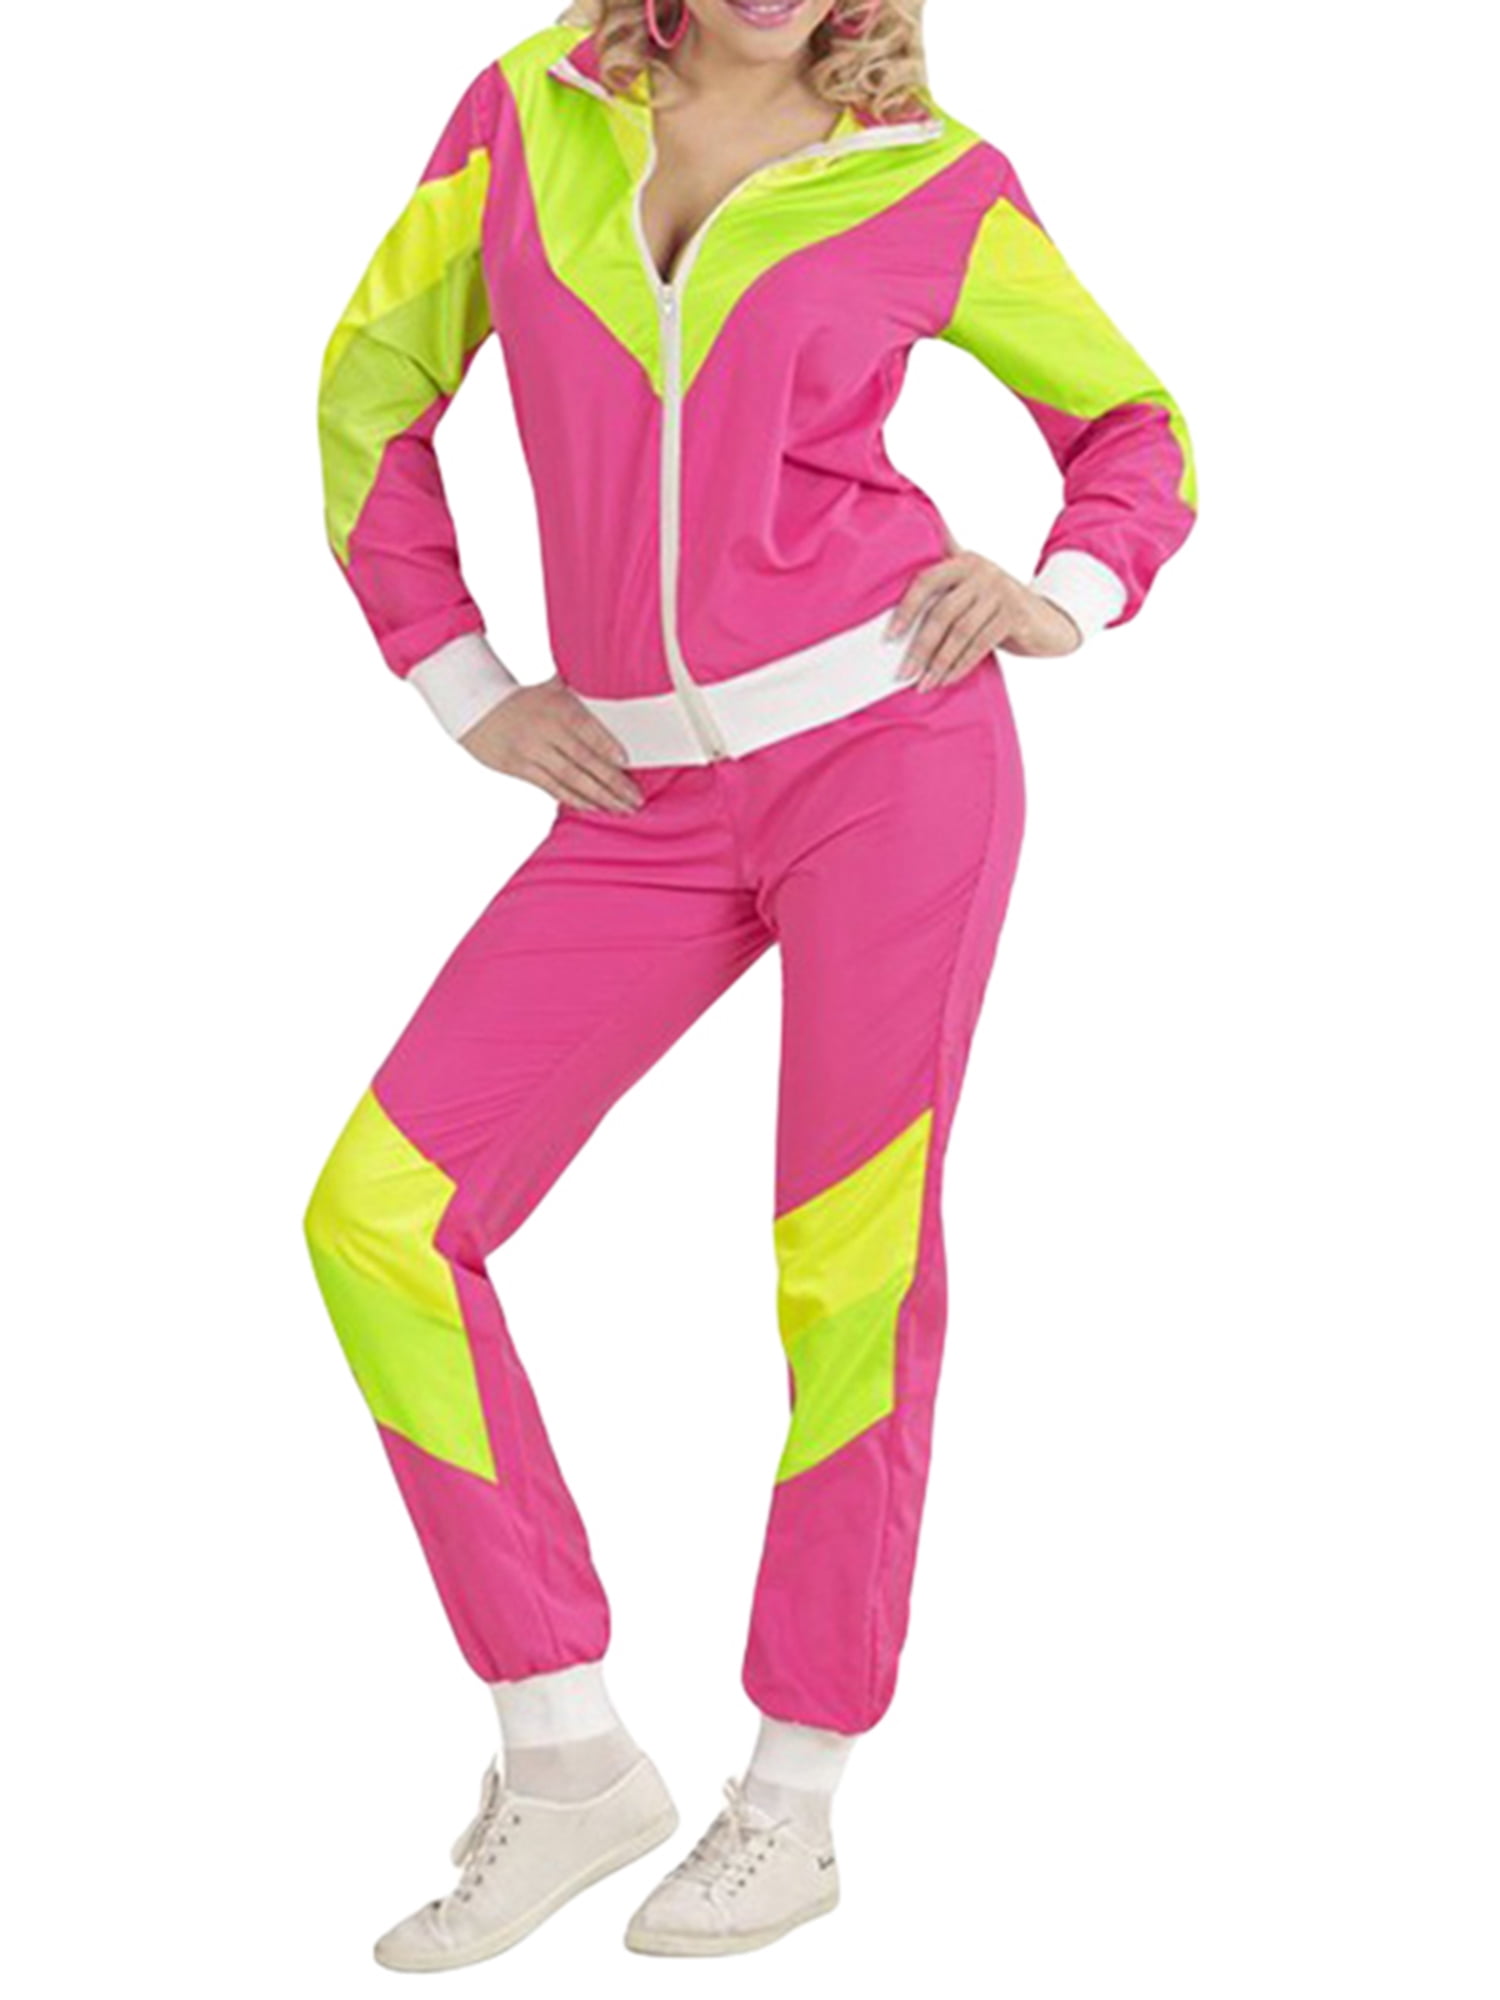 Springcmy Women Men 80s/90s Tracksuit Outfits Color Block Retro Disco Hip  Hop Costumes 2 Piece Windbreaker Jacket and Trousers Set Pink S 